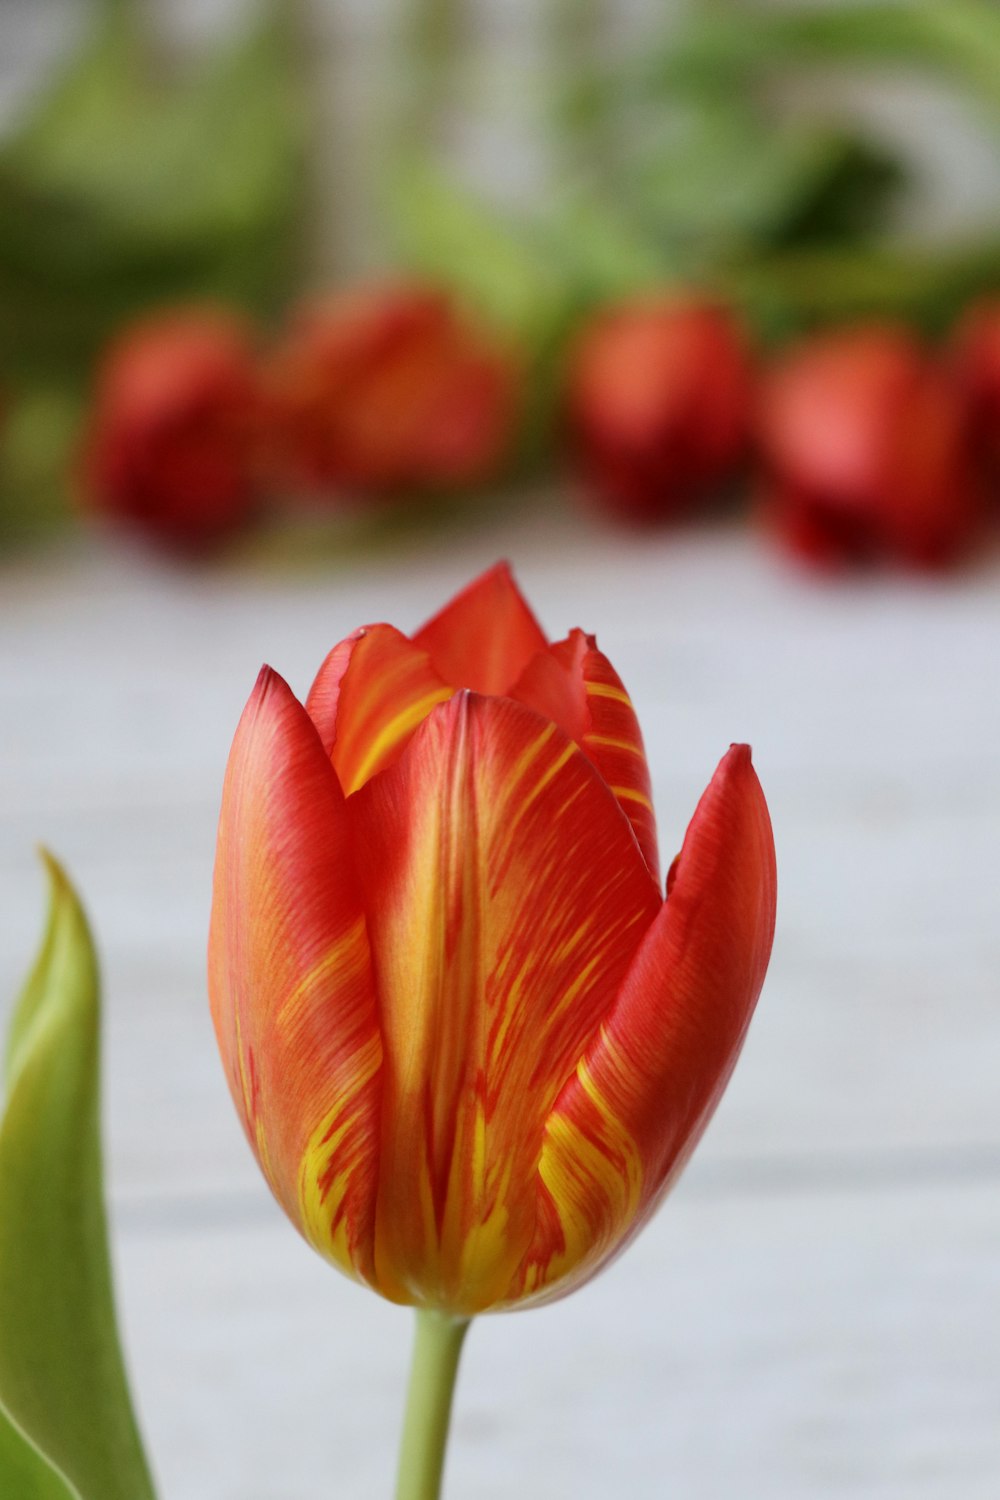 red and yellow tulip in bloom during daytime